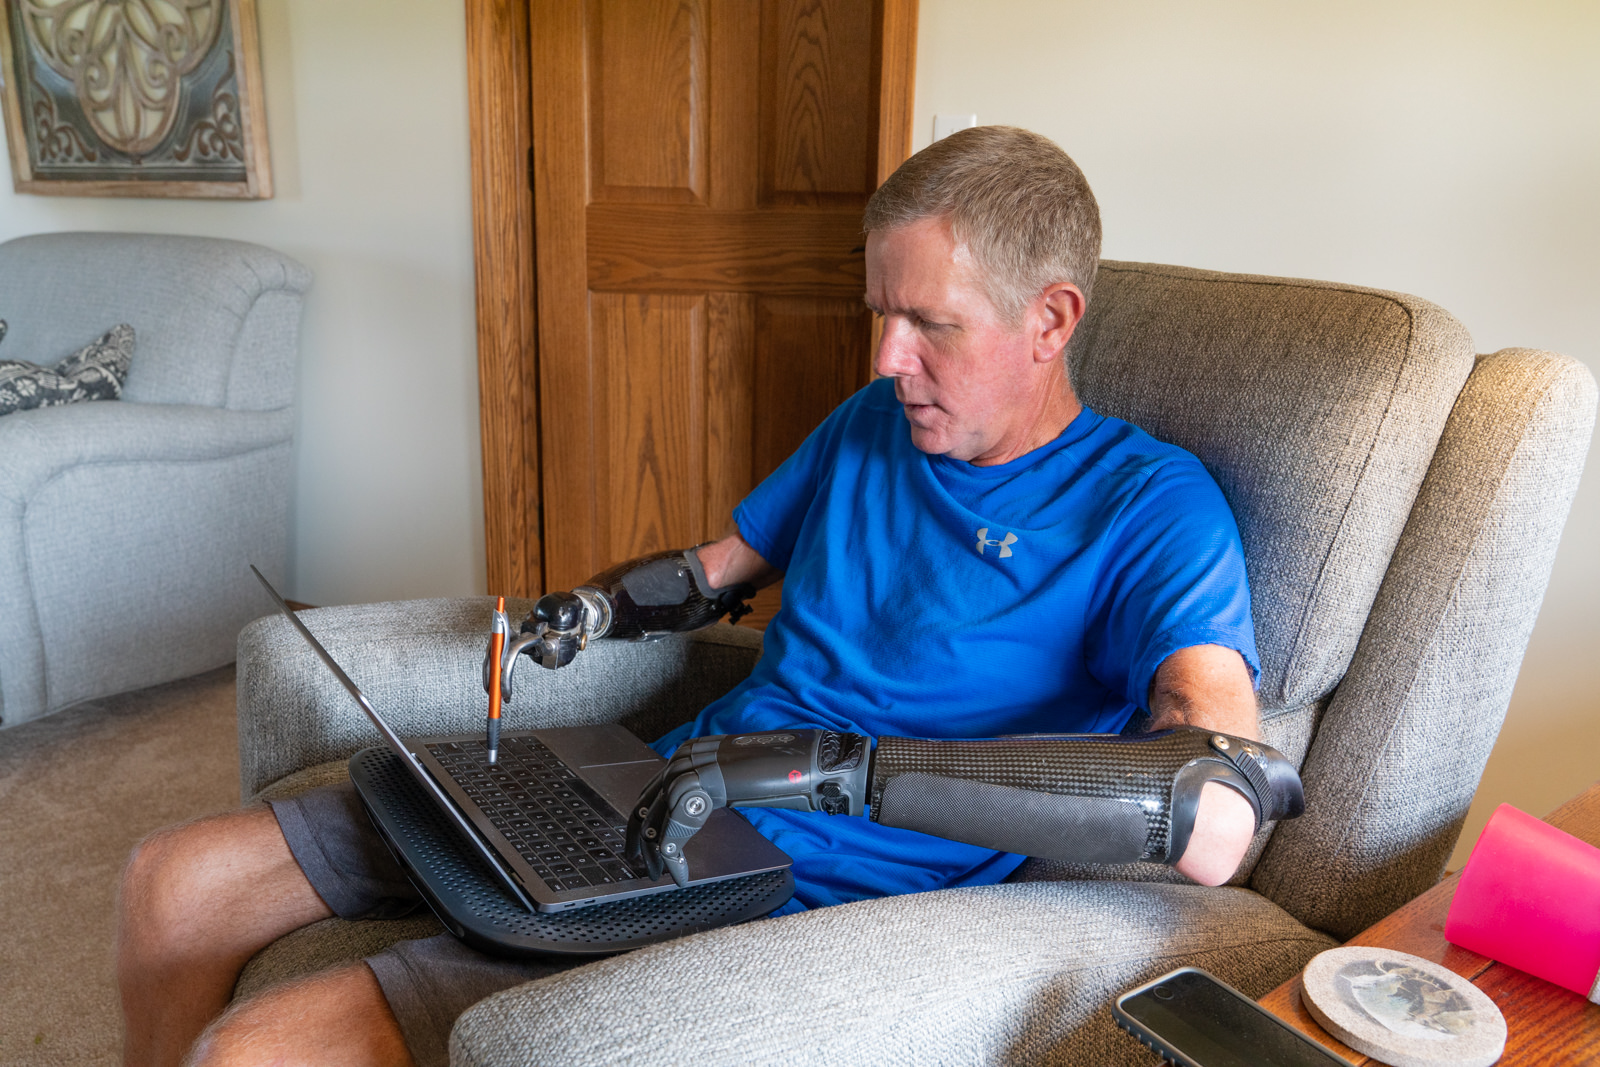 Life Hacks for People with Upper Limb Loss